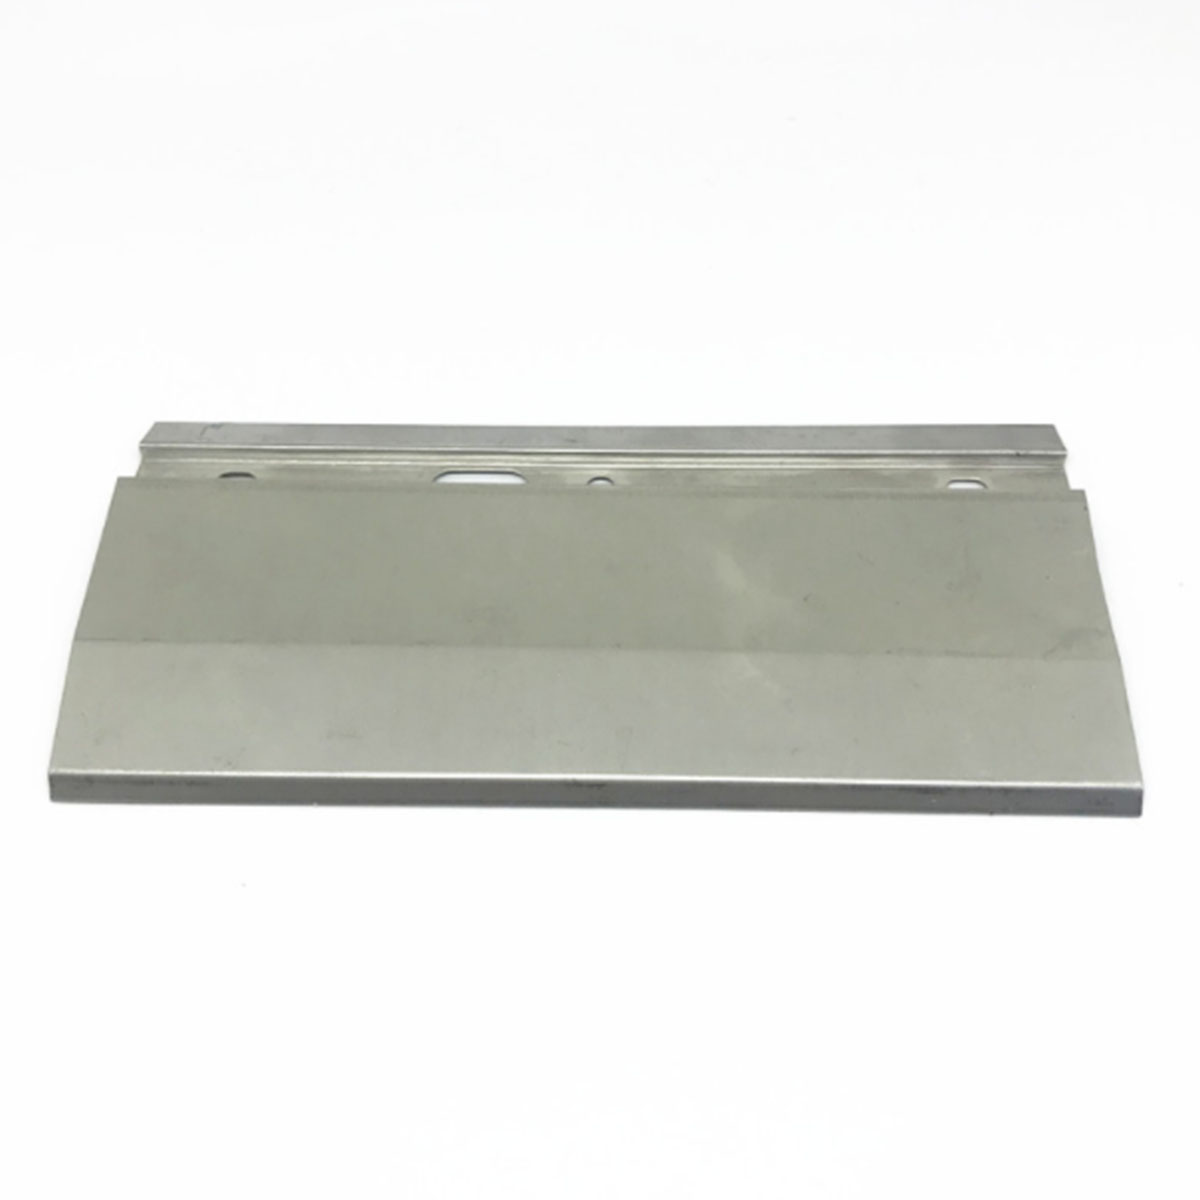 cover for For TSC TTP-2410 346M 644M Pro printhead - Click Image to Close